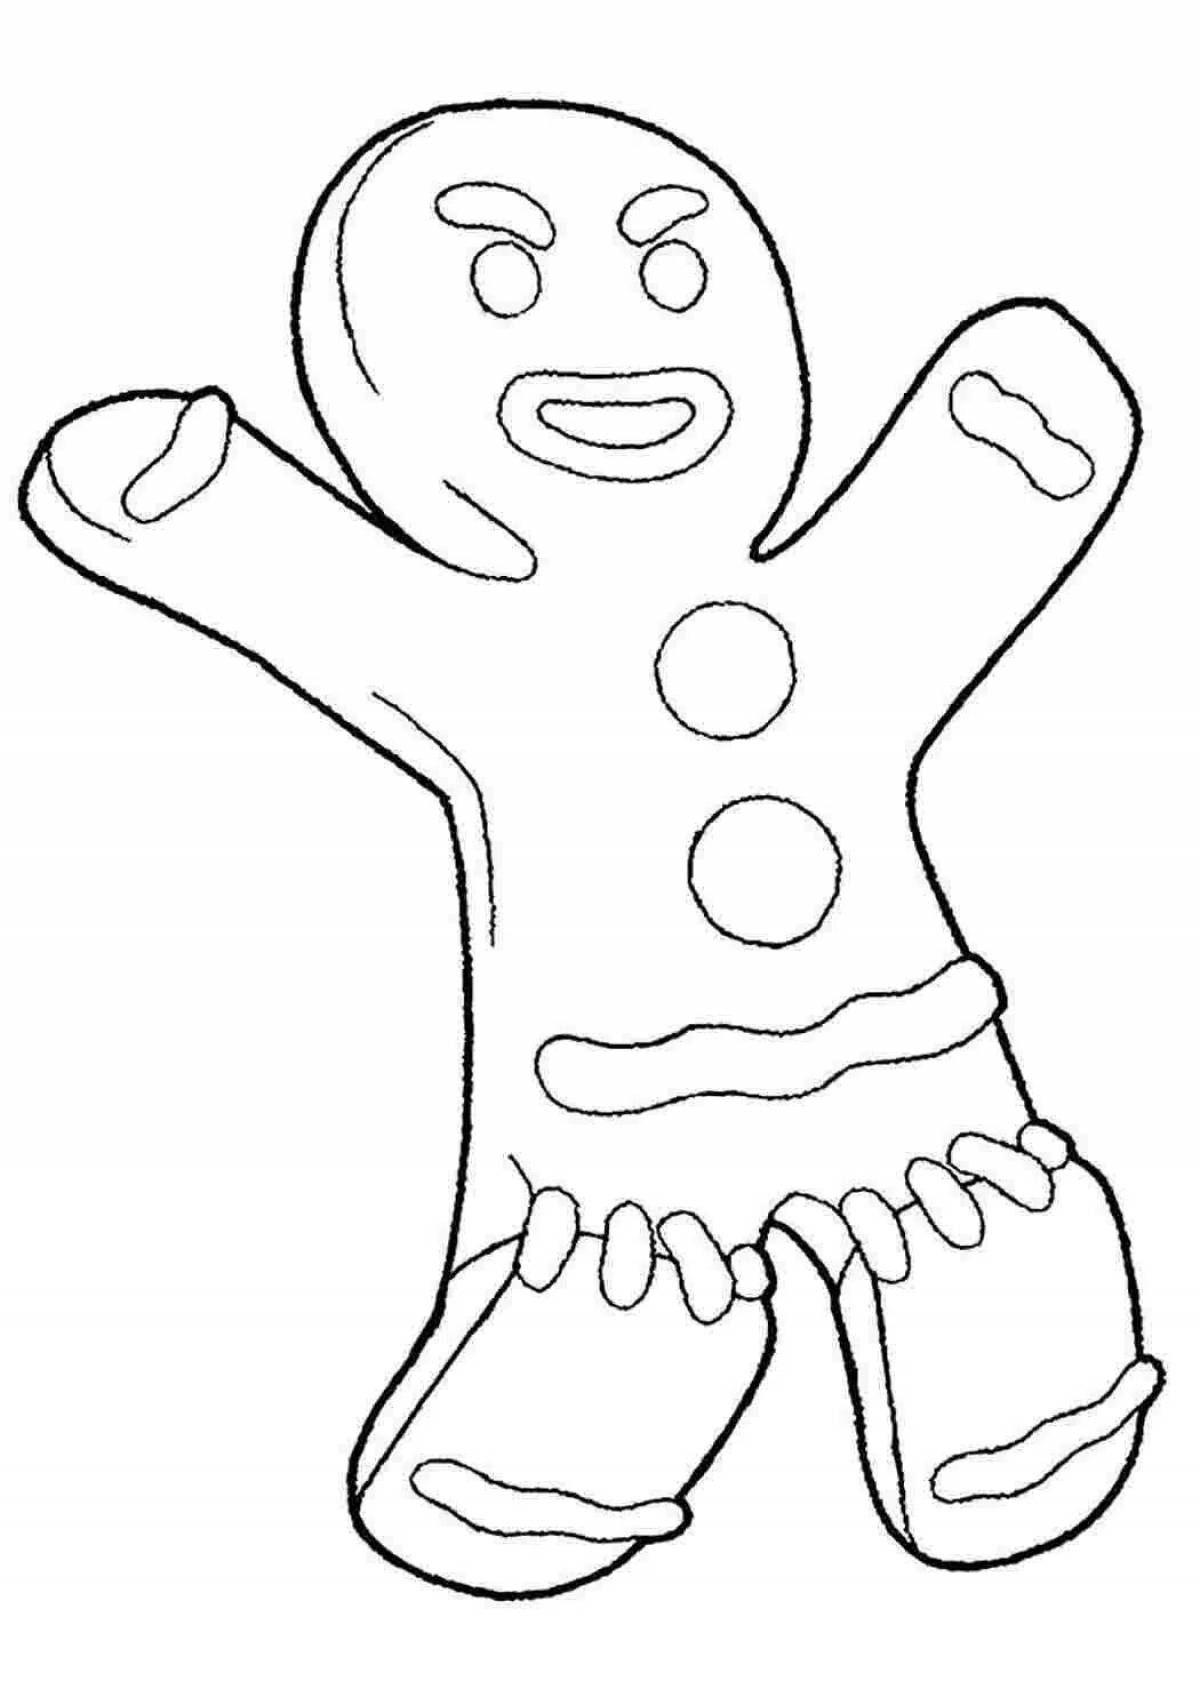 Coloring page magic Christmas cookies